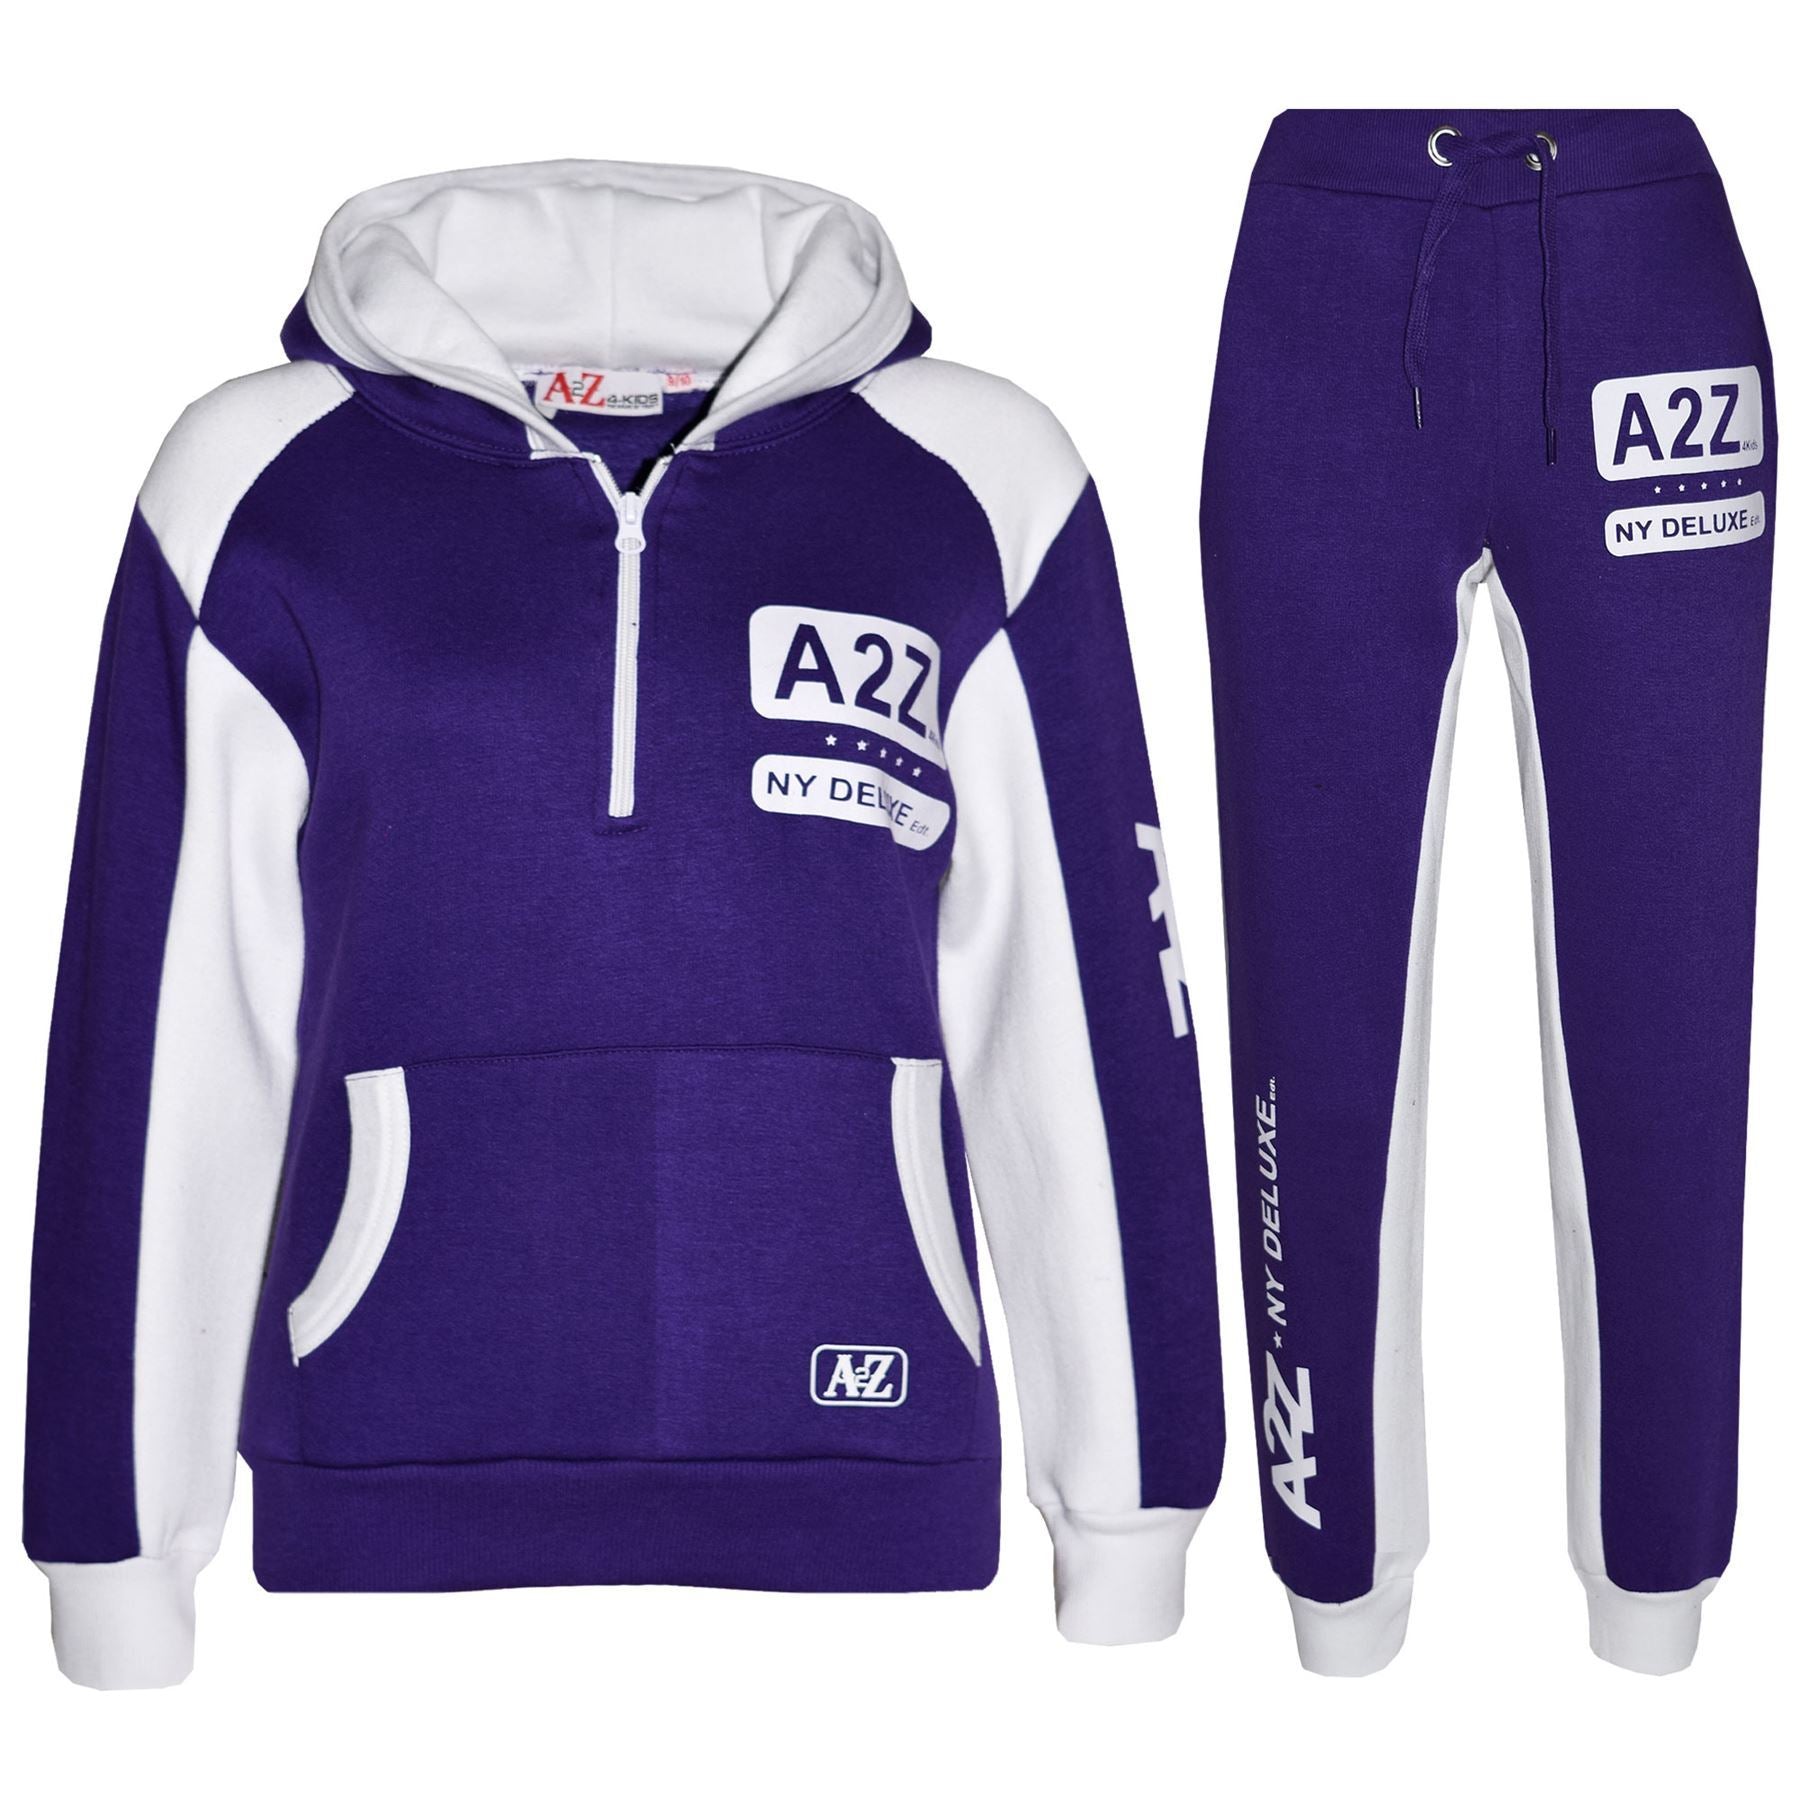 Kids Tracksuit Boys Girls A2Z NY Deluxe Purple Top Jogger Bottom Jogging Suit